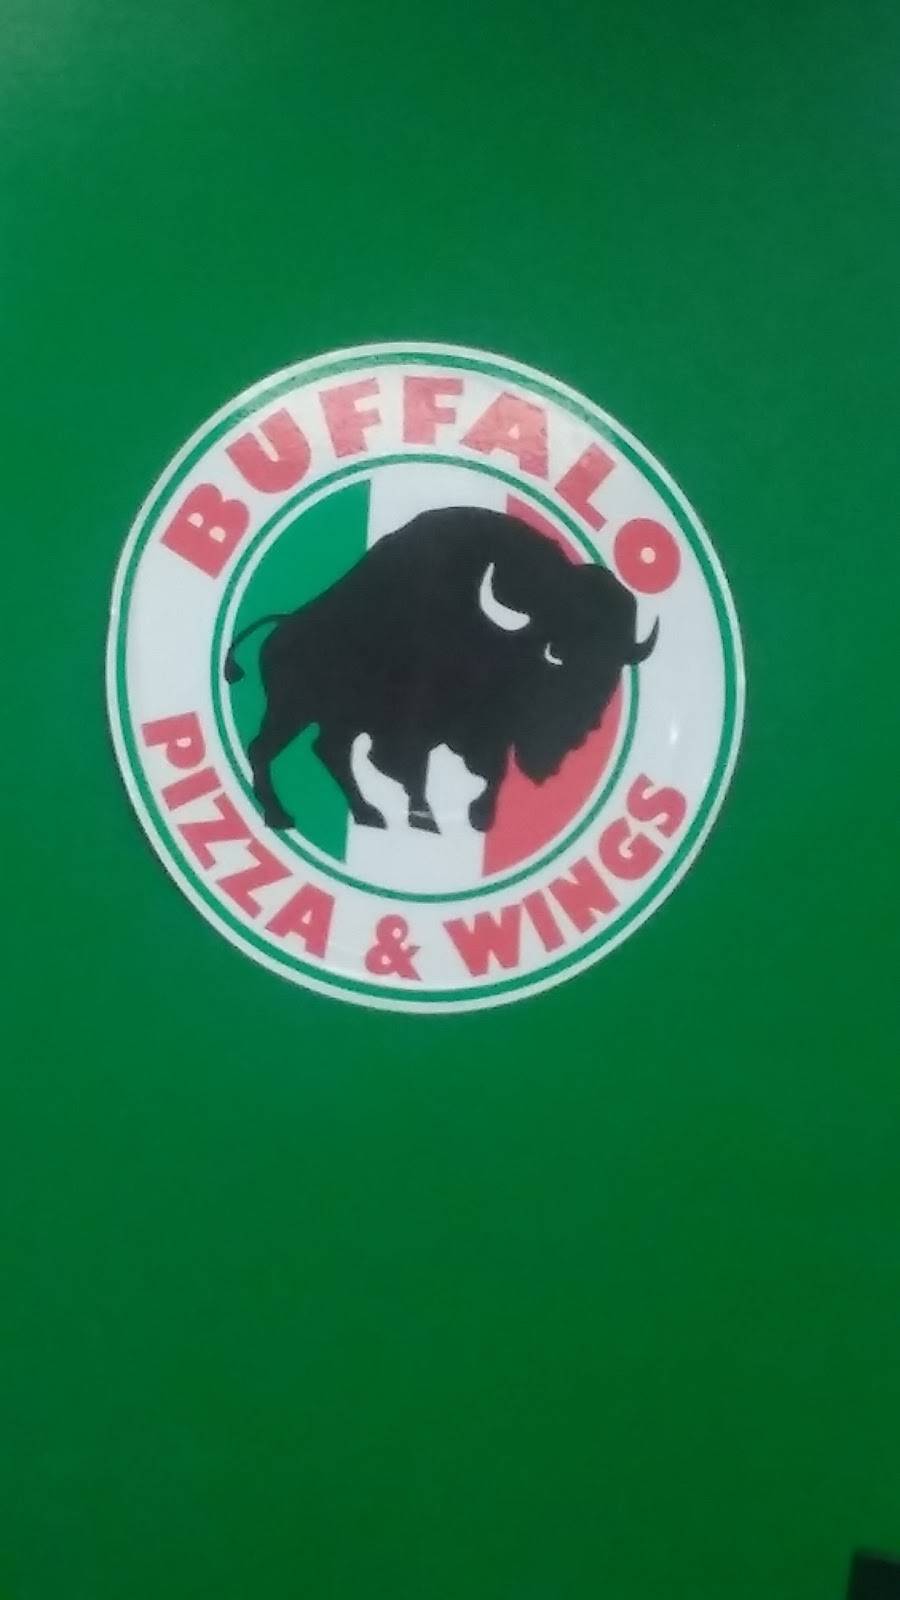 Buffalo Pizza and Wings | meal delivery | 2126 Hwy 9 E, Longs, SC 29568, USA | 8433991919 OR +1 843-399-1919